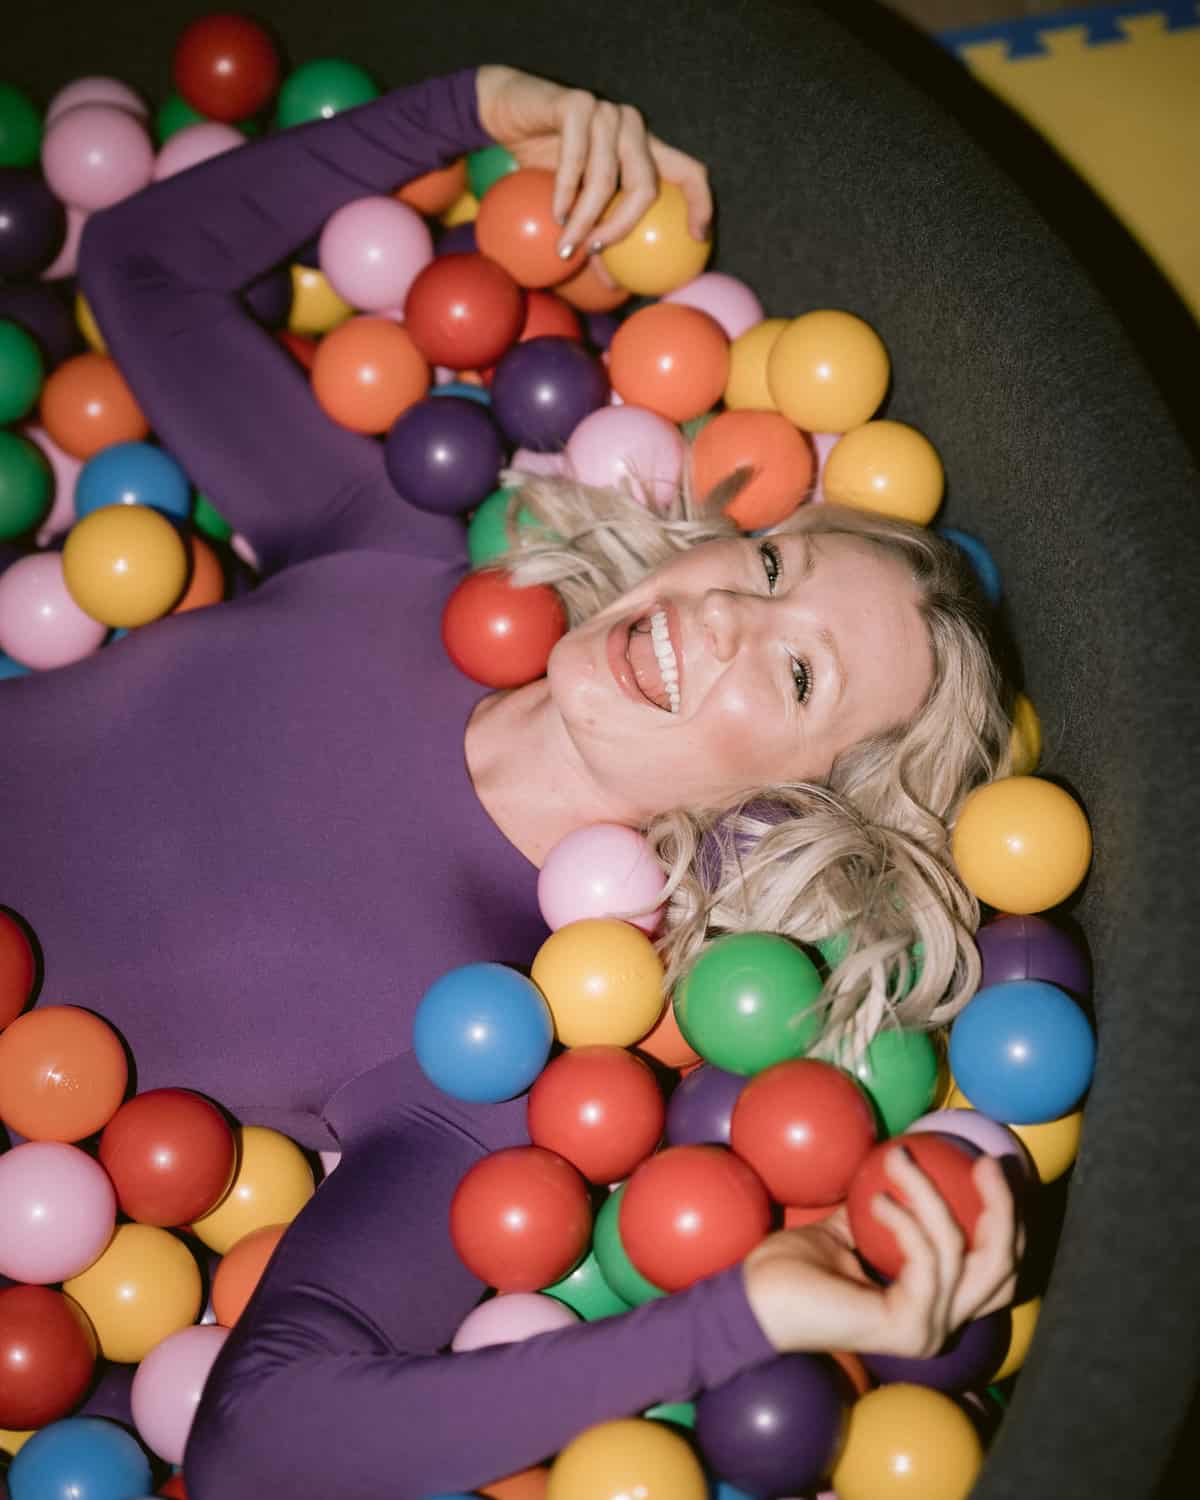 Abbey lying in a ball pit.